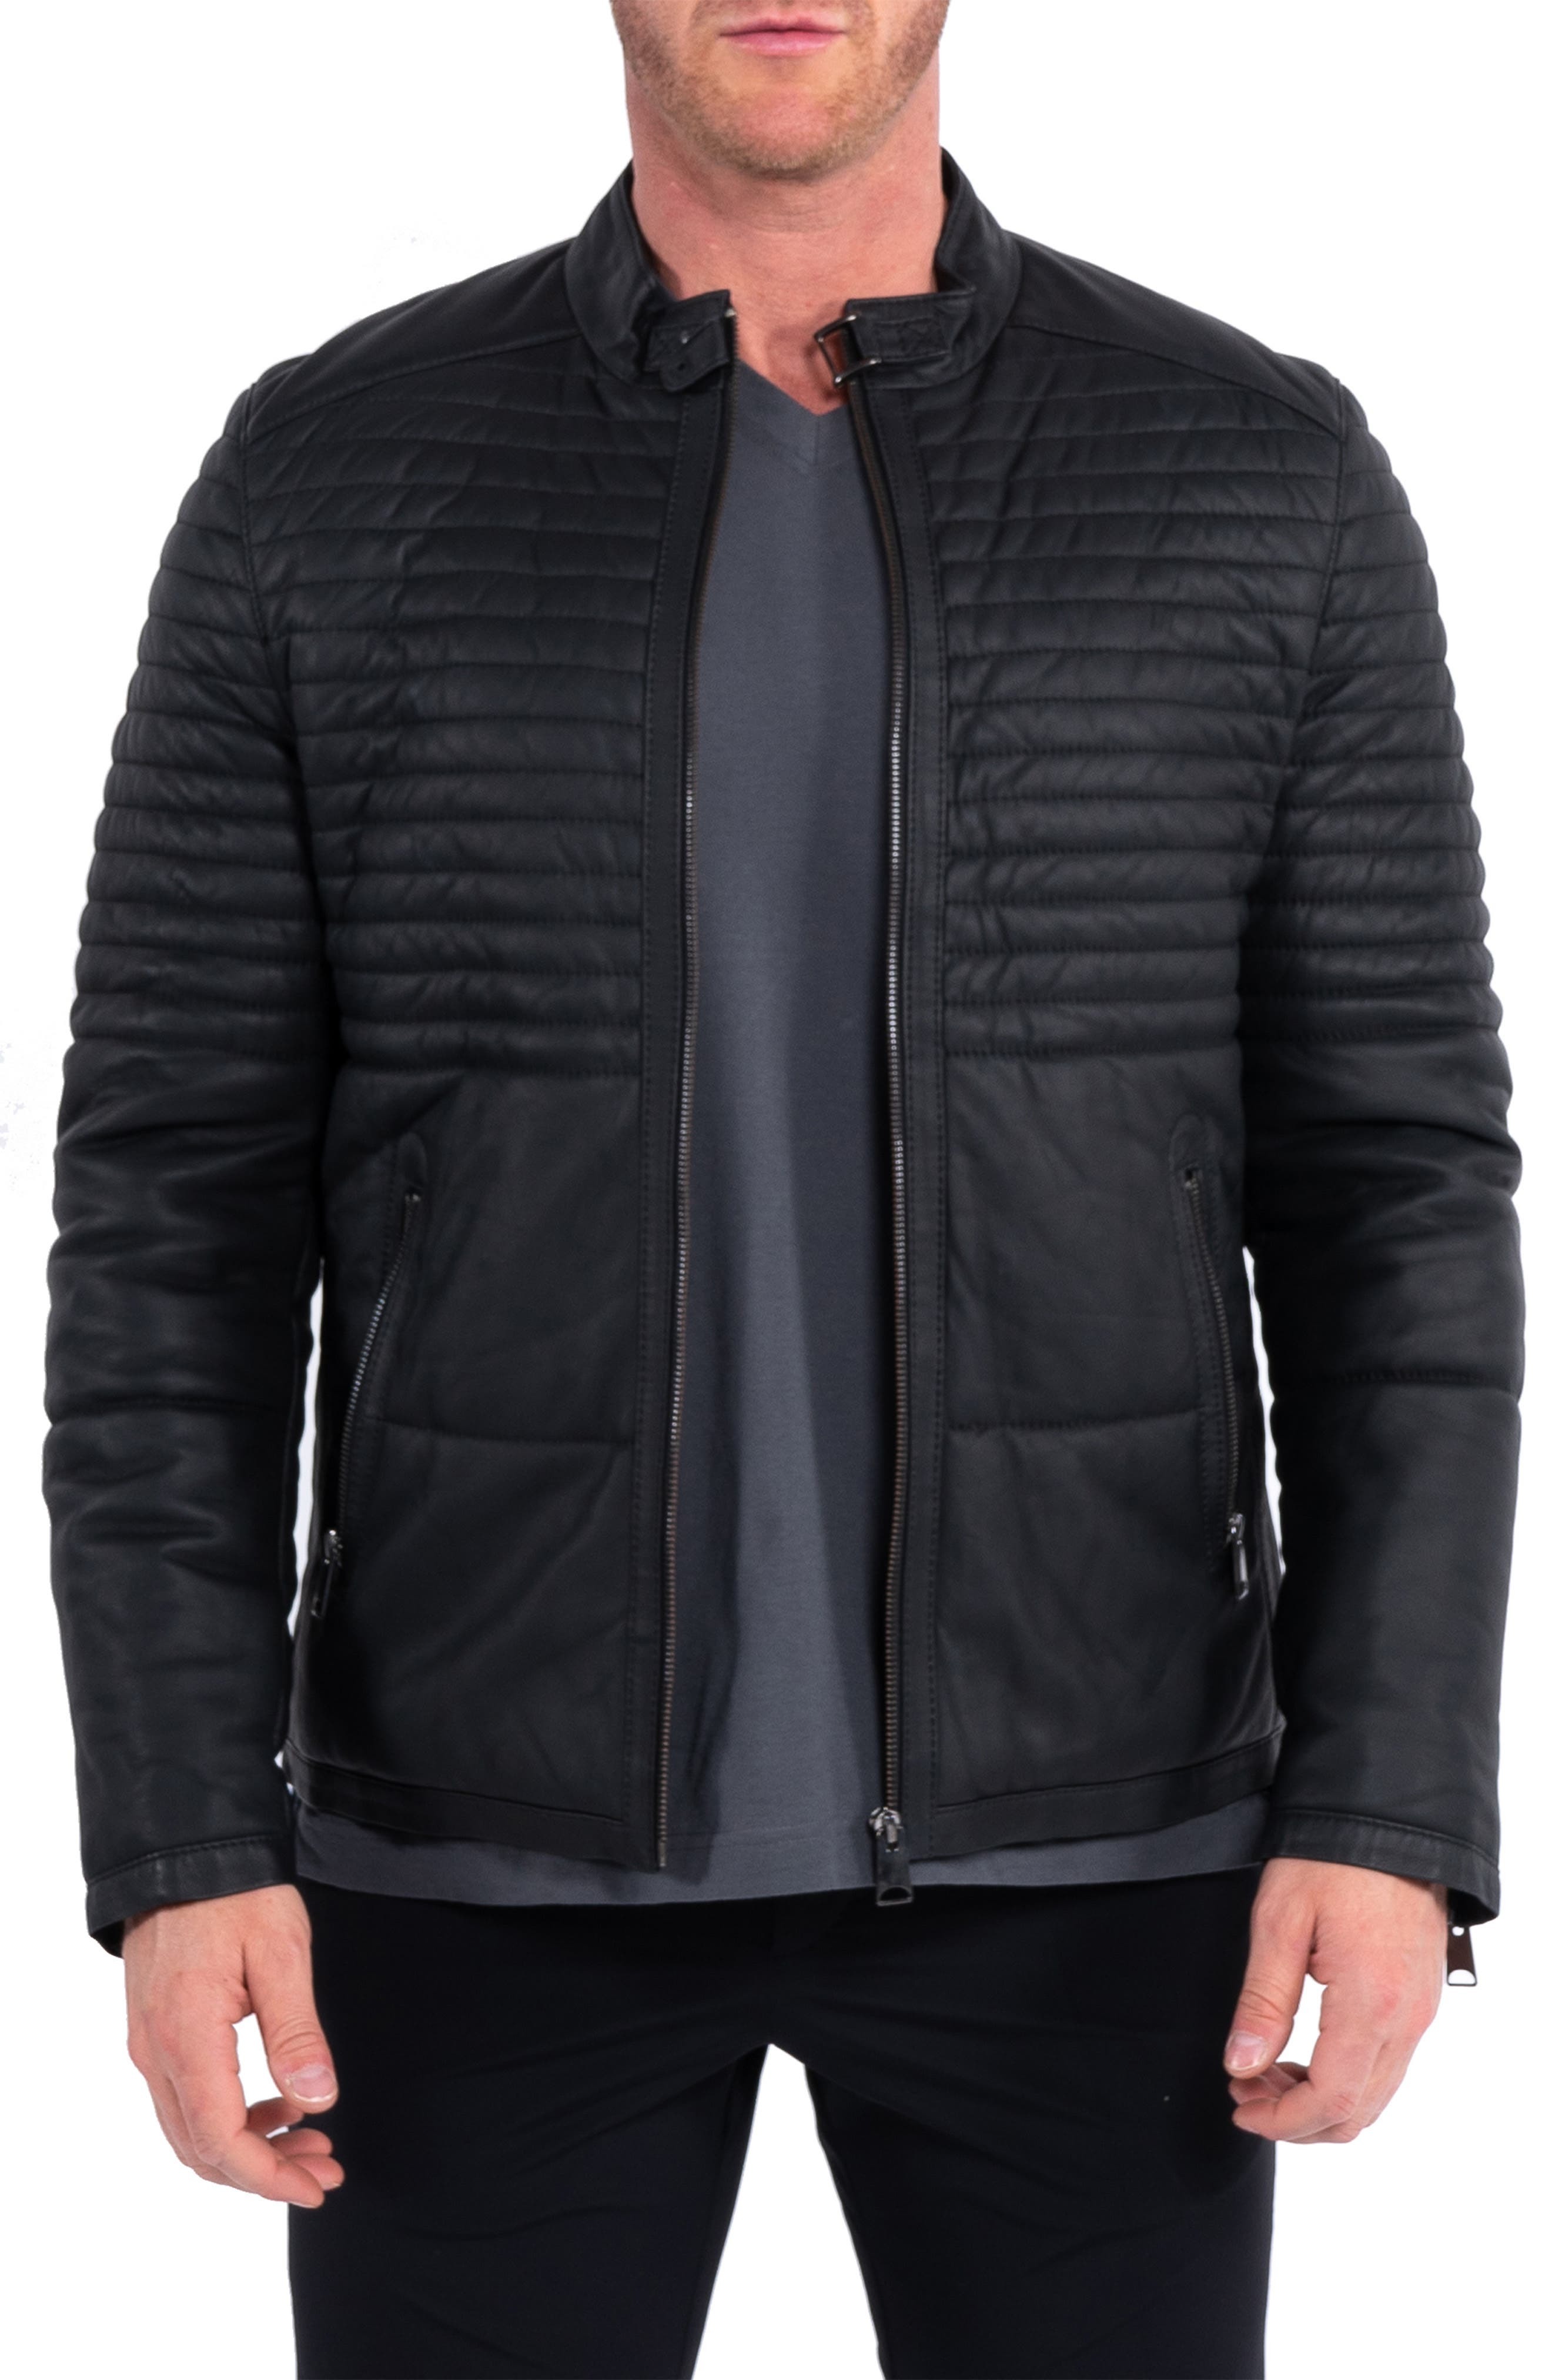 Maceoo Quilted Leather Jacket, $598 | Nordstrom | Lookastic